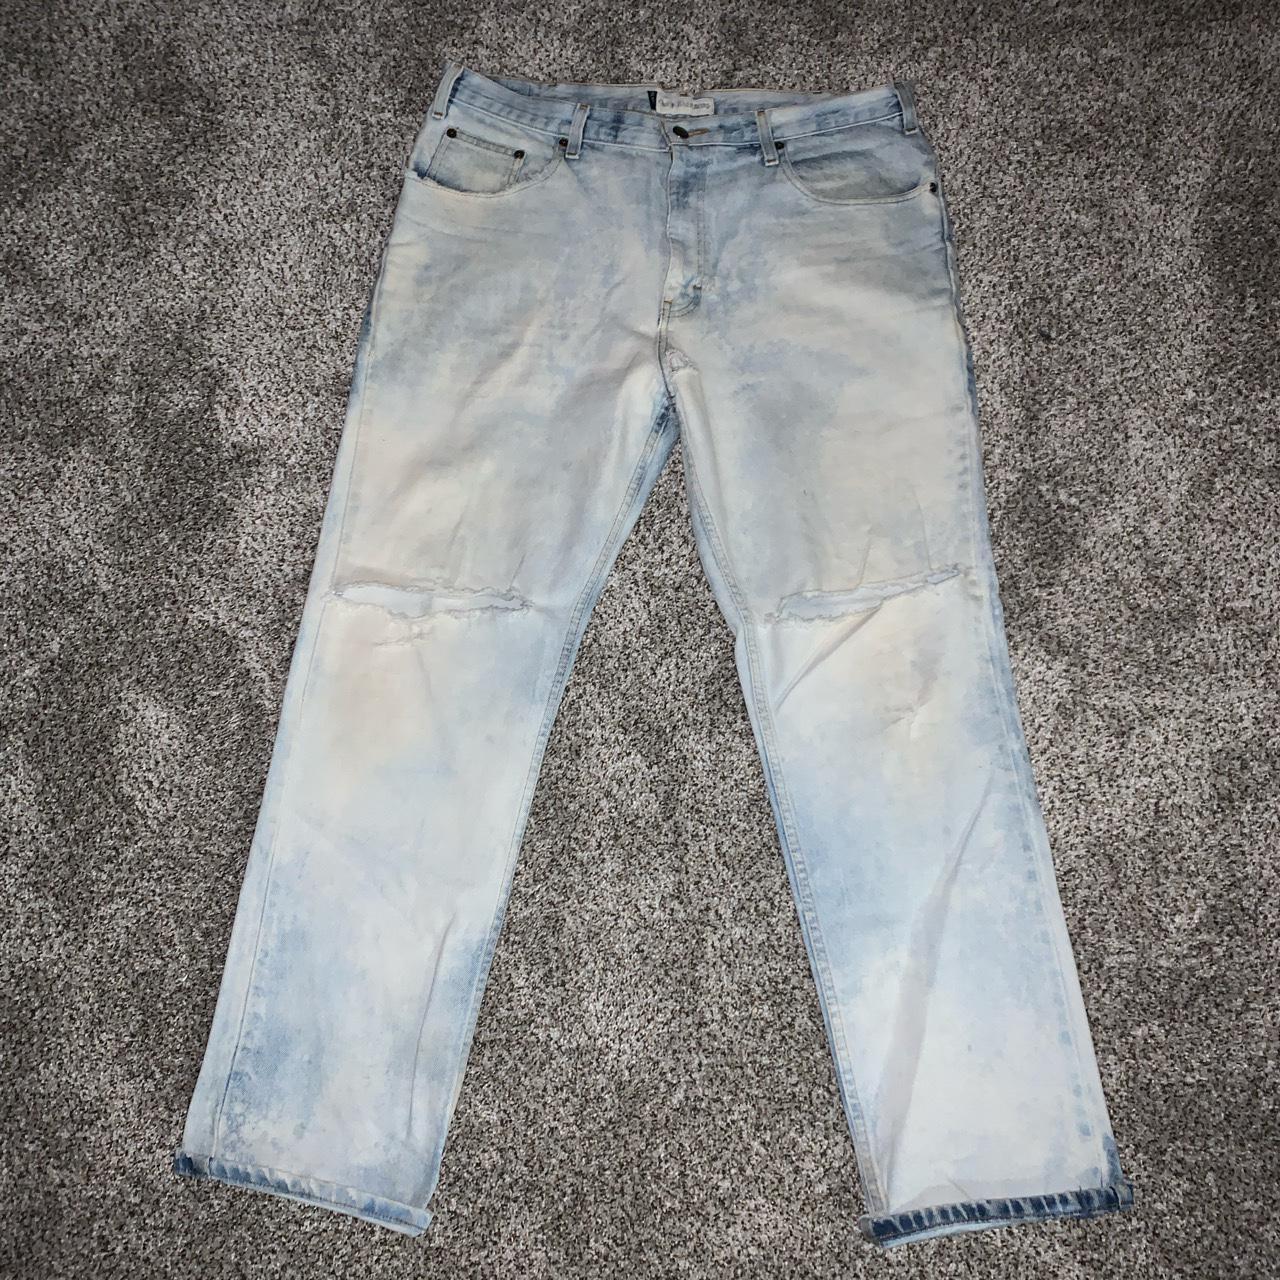 Canyon River Blues Men's Blue and White Jeans (2)